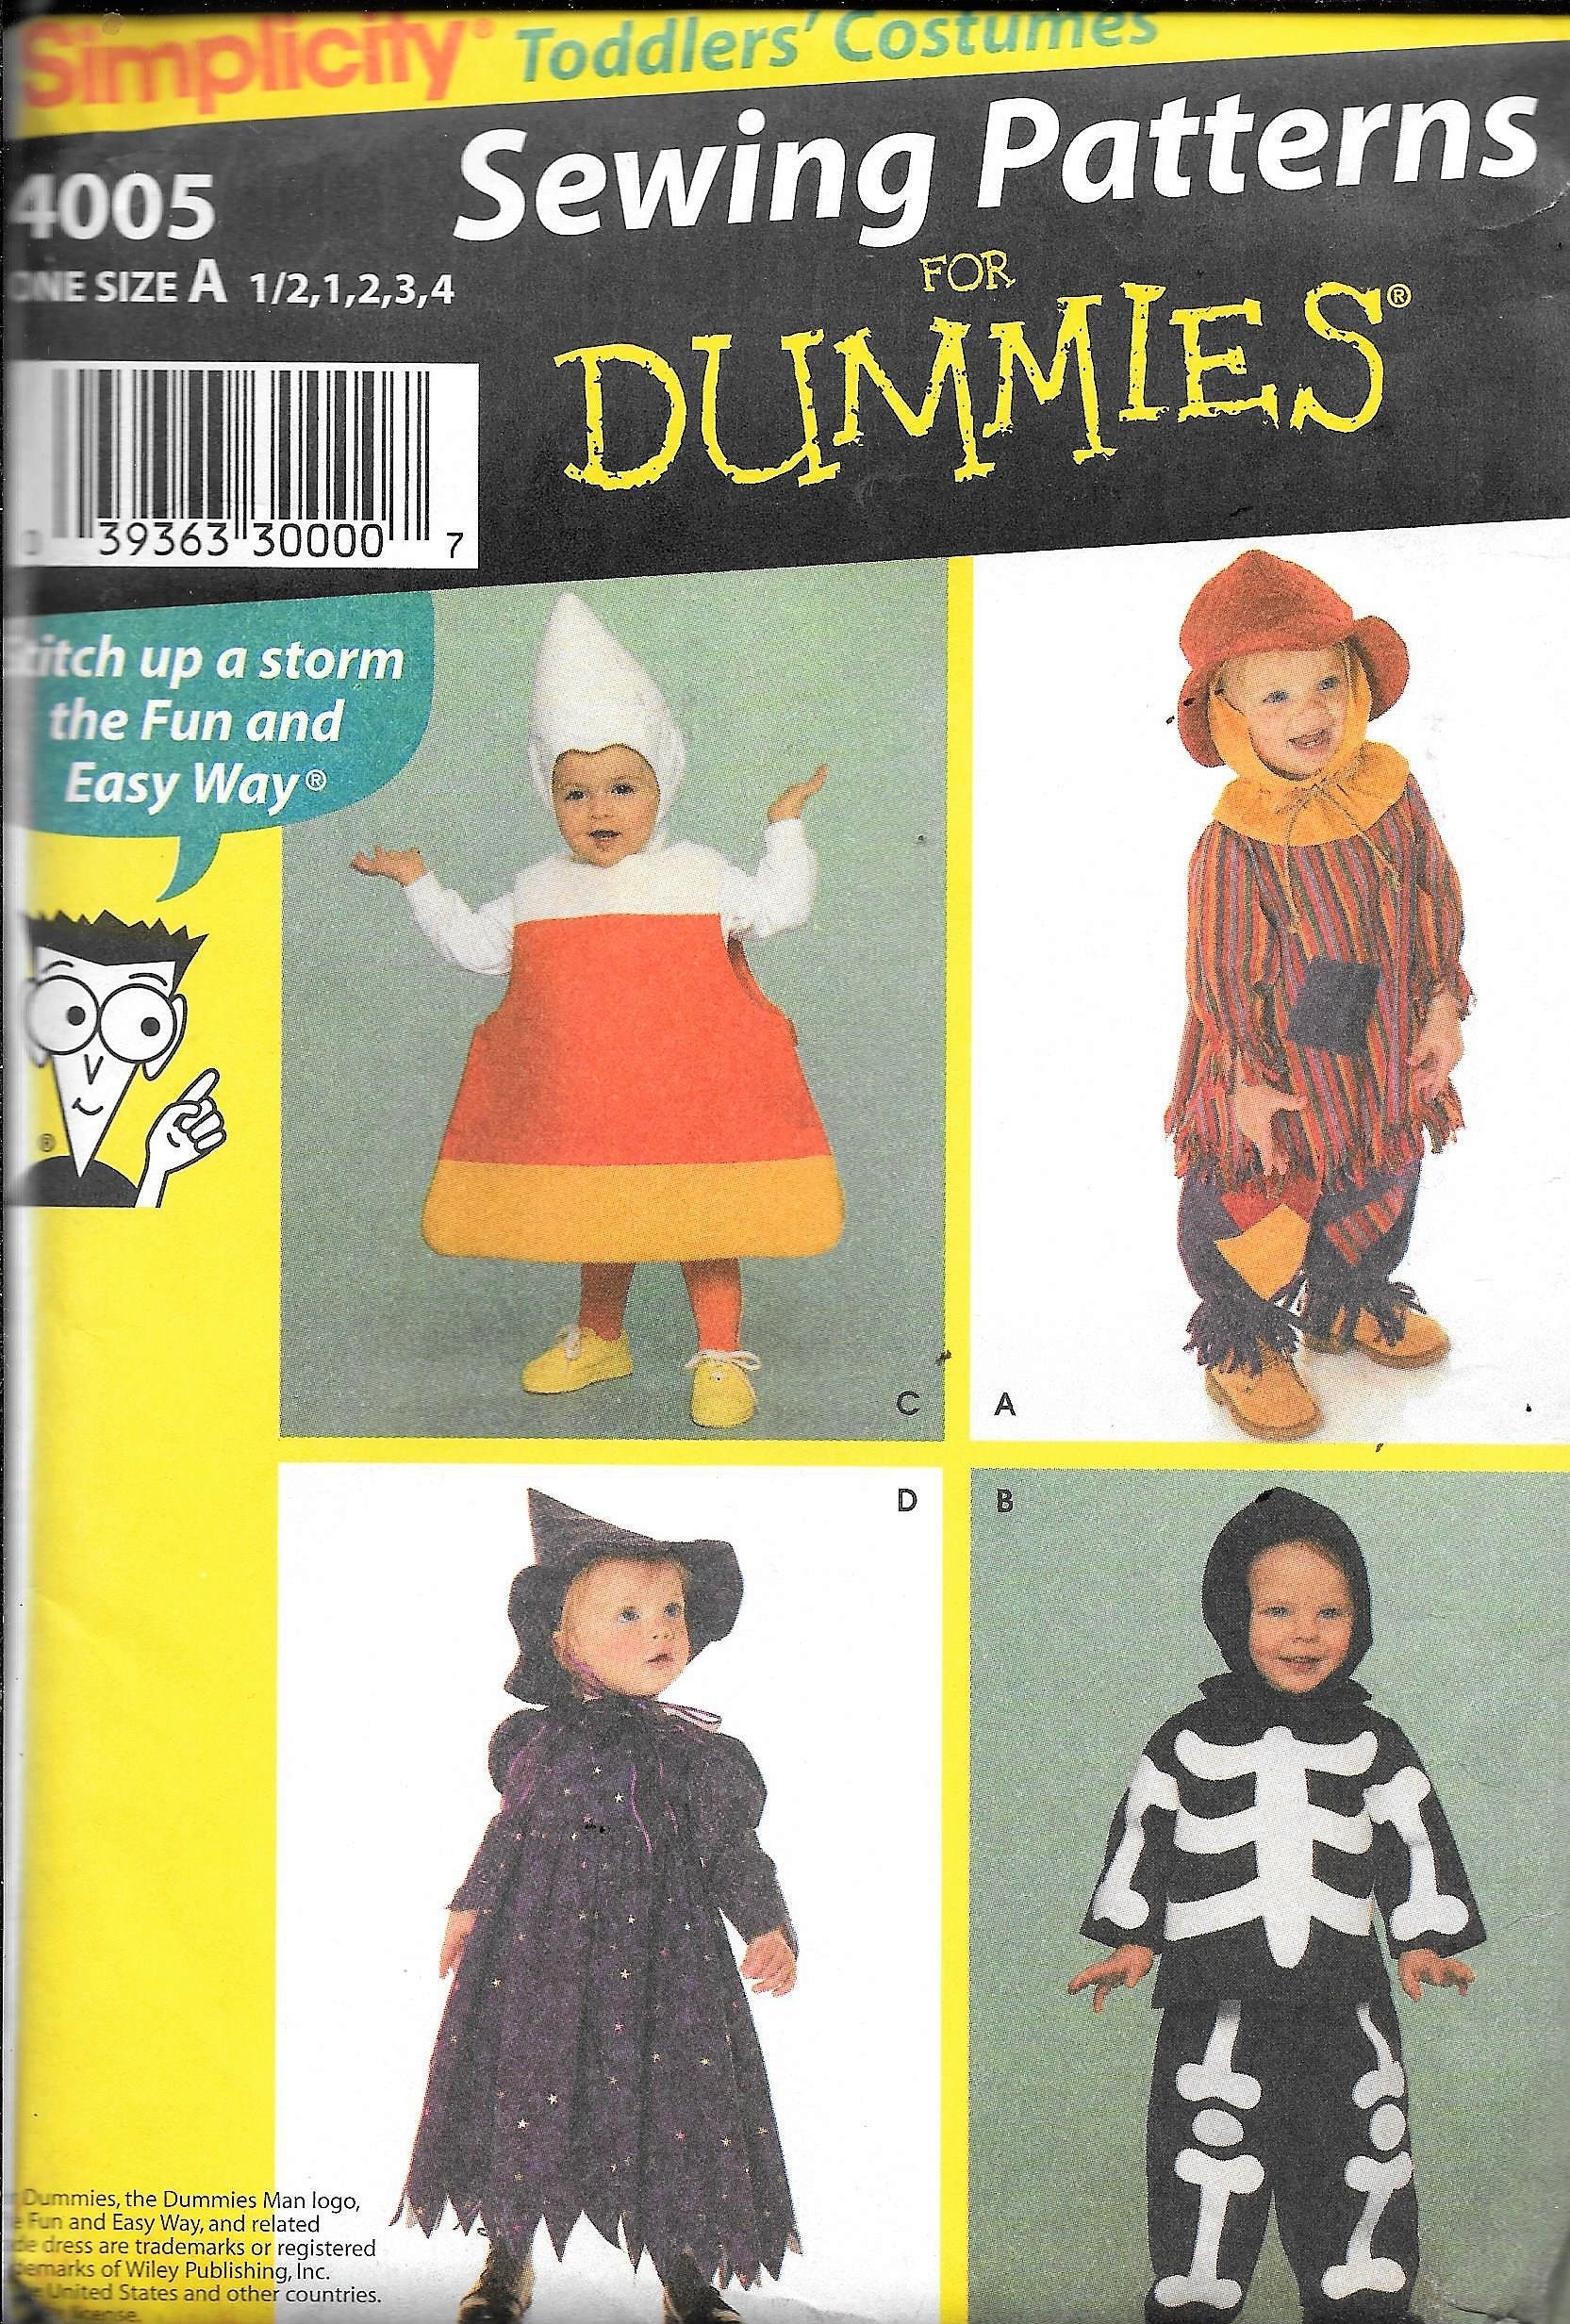 Simplicity 4005/0523 Sewing for Dummies Childs Costume Pattern Candy Corn,  Witch, Scarecrow and Skeleton UNCUT Size 1/2, 1, 2, 3, 4 